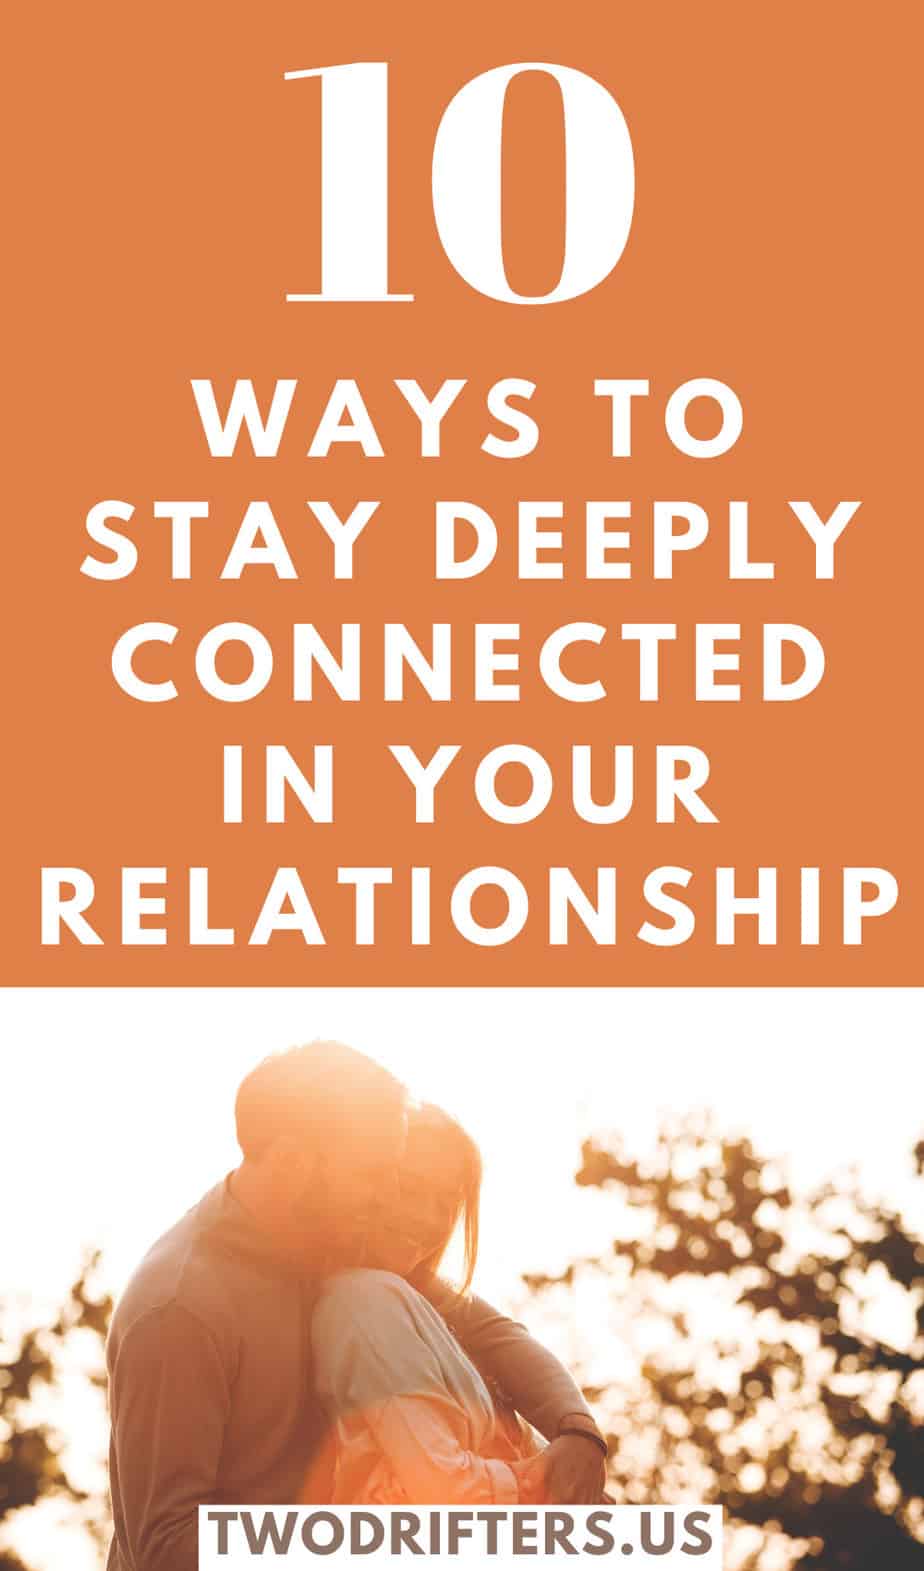 Pinterest social image that says “10 ways to stay deeply connected in your relationship.”